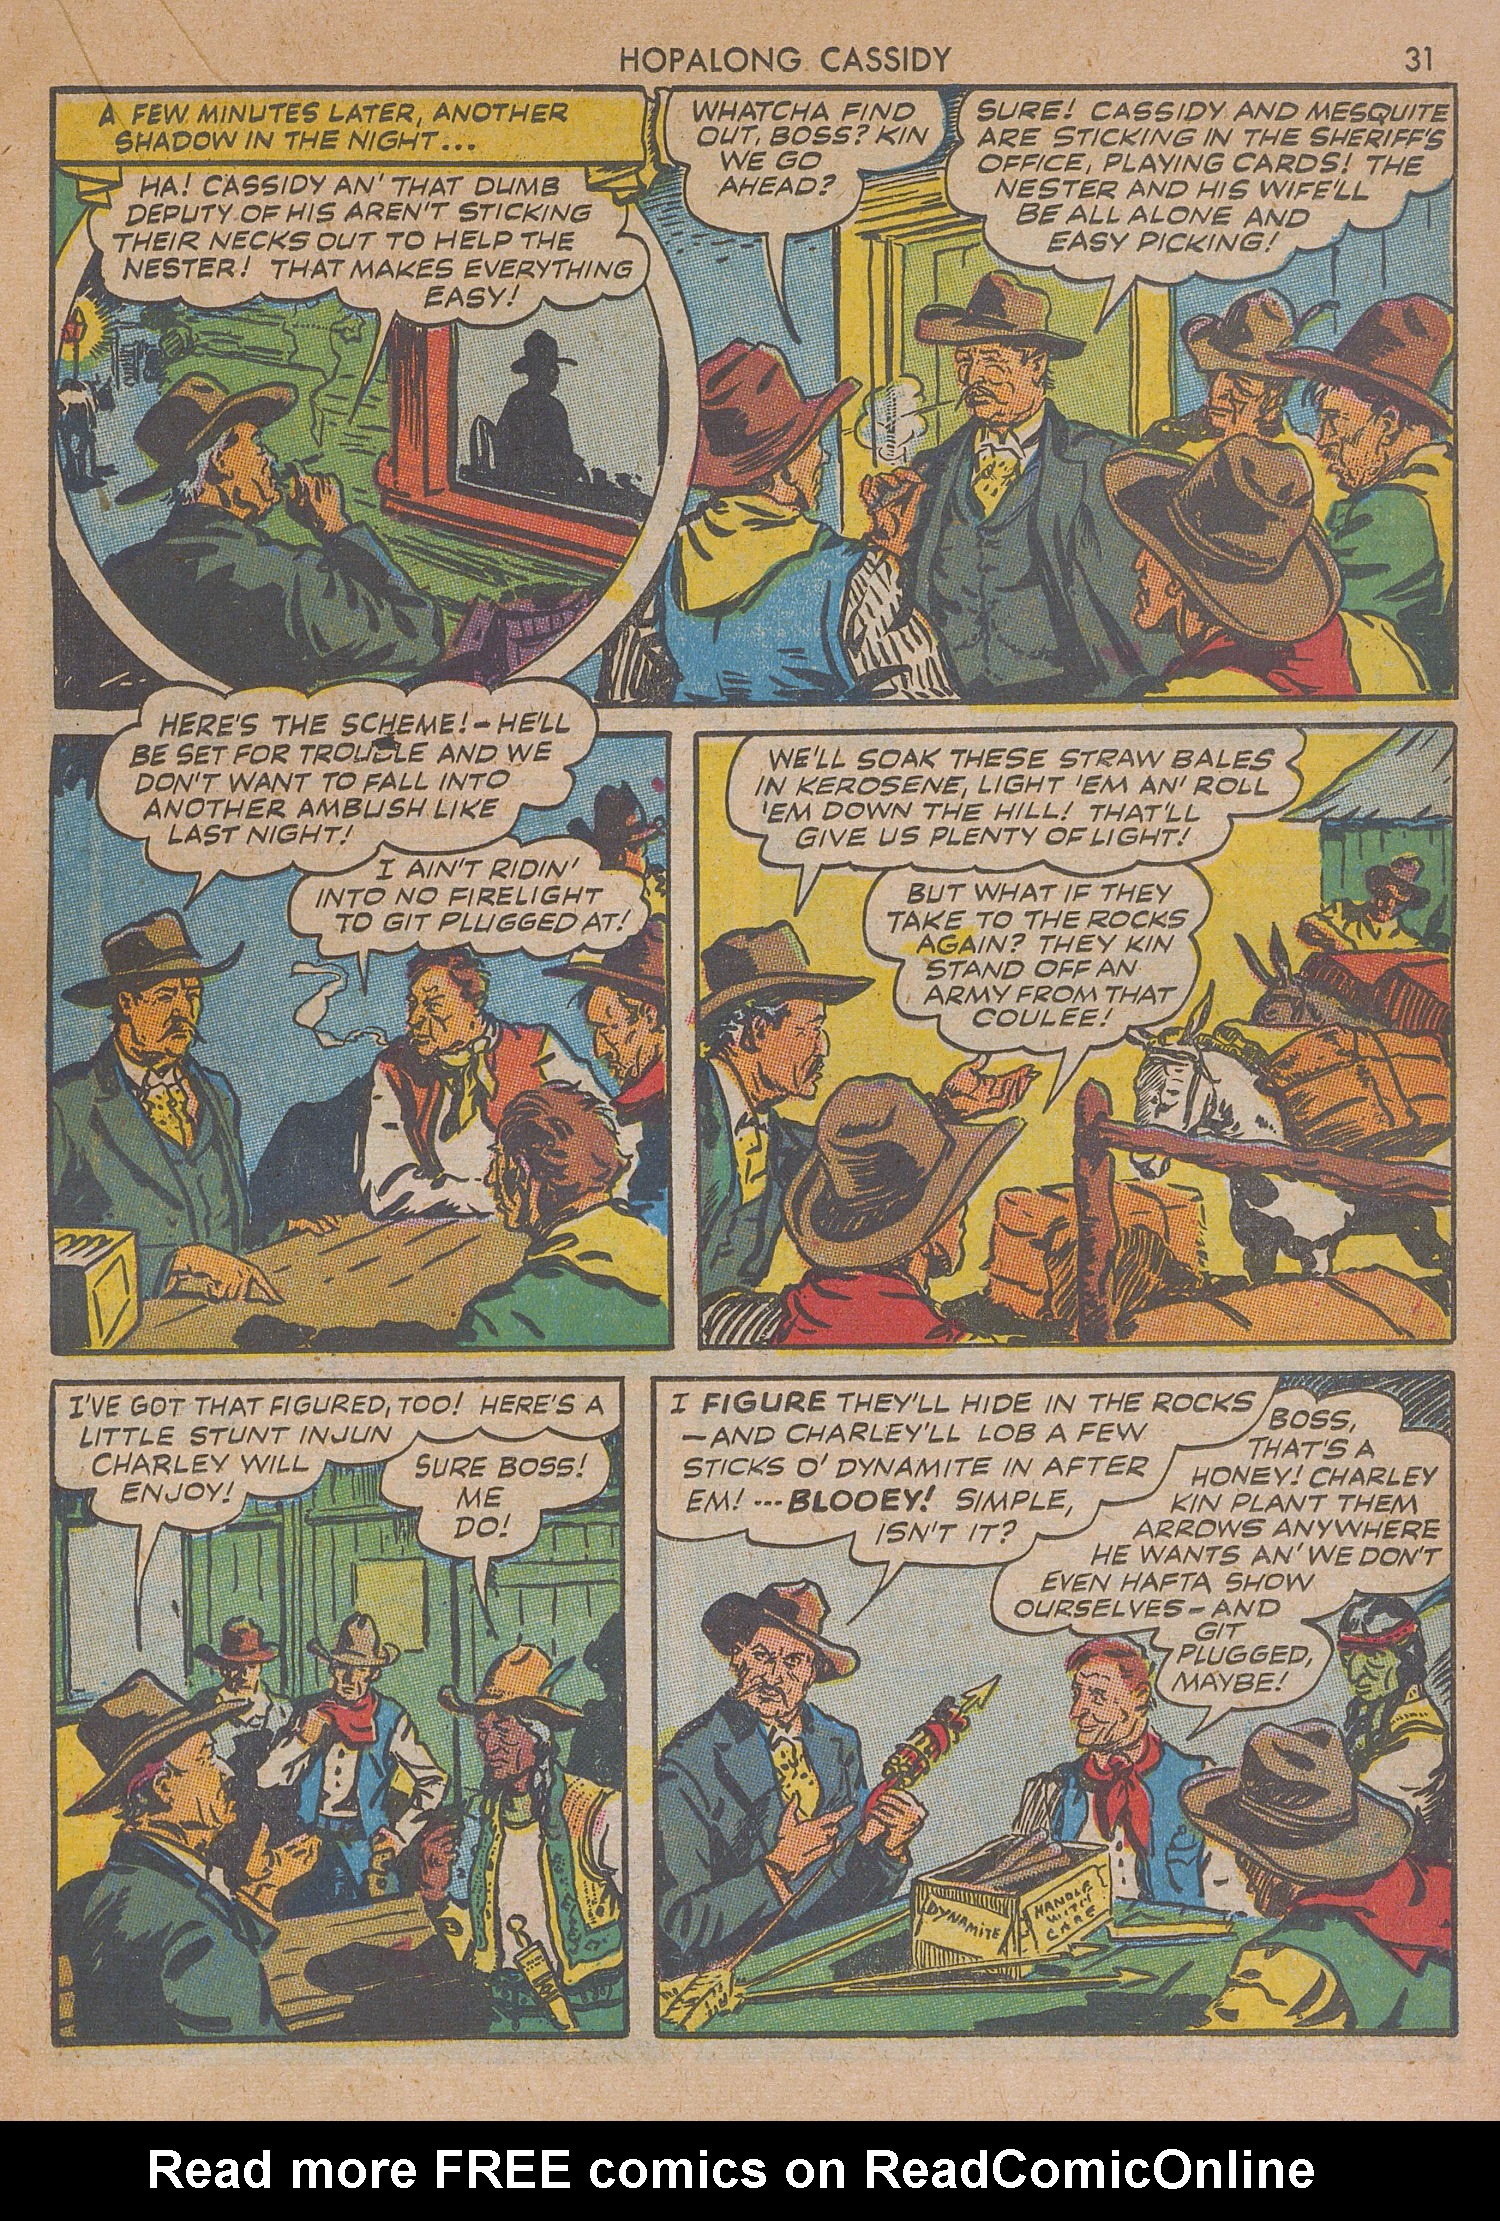 Read online Hopalong Cassidy comic -  Issue #1 - 31